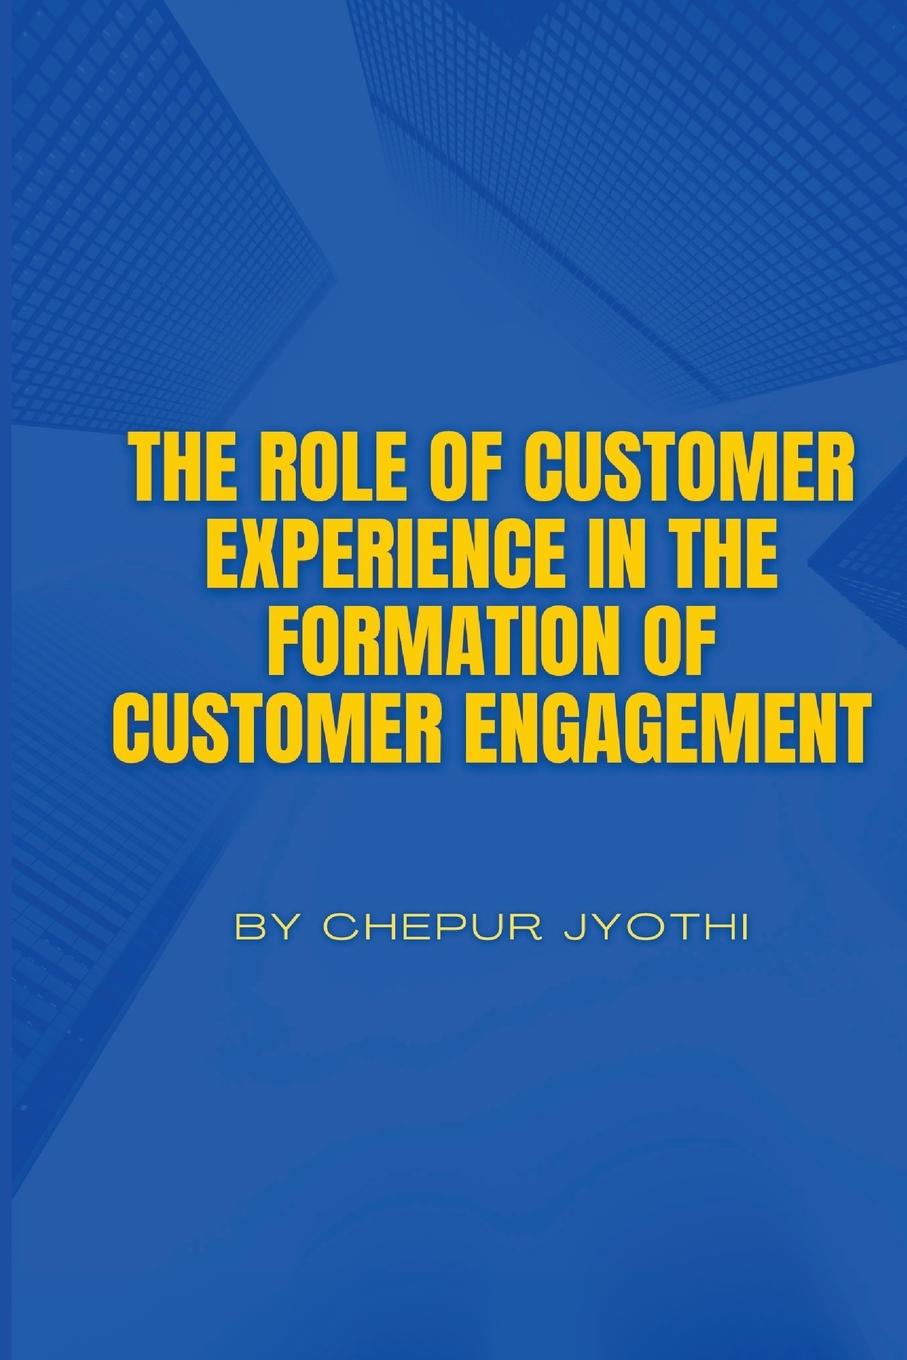 Book THE ROLE OF CUSTOMER EXPERIENCE IN THE FORMATION OF CUSTOMER ENGAGEMENT 